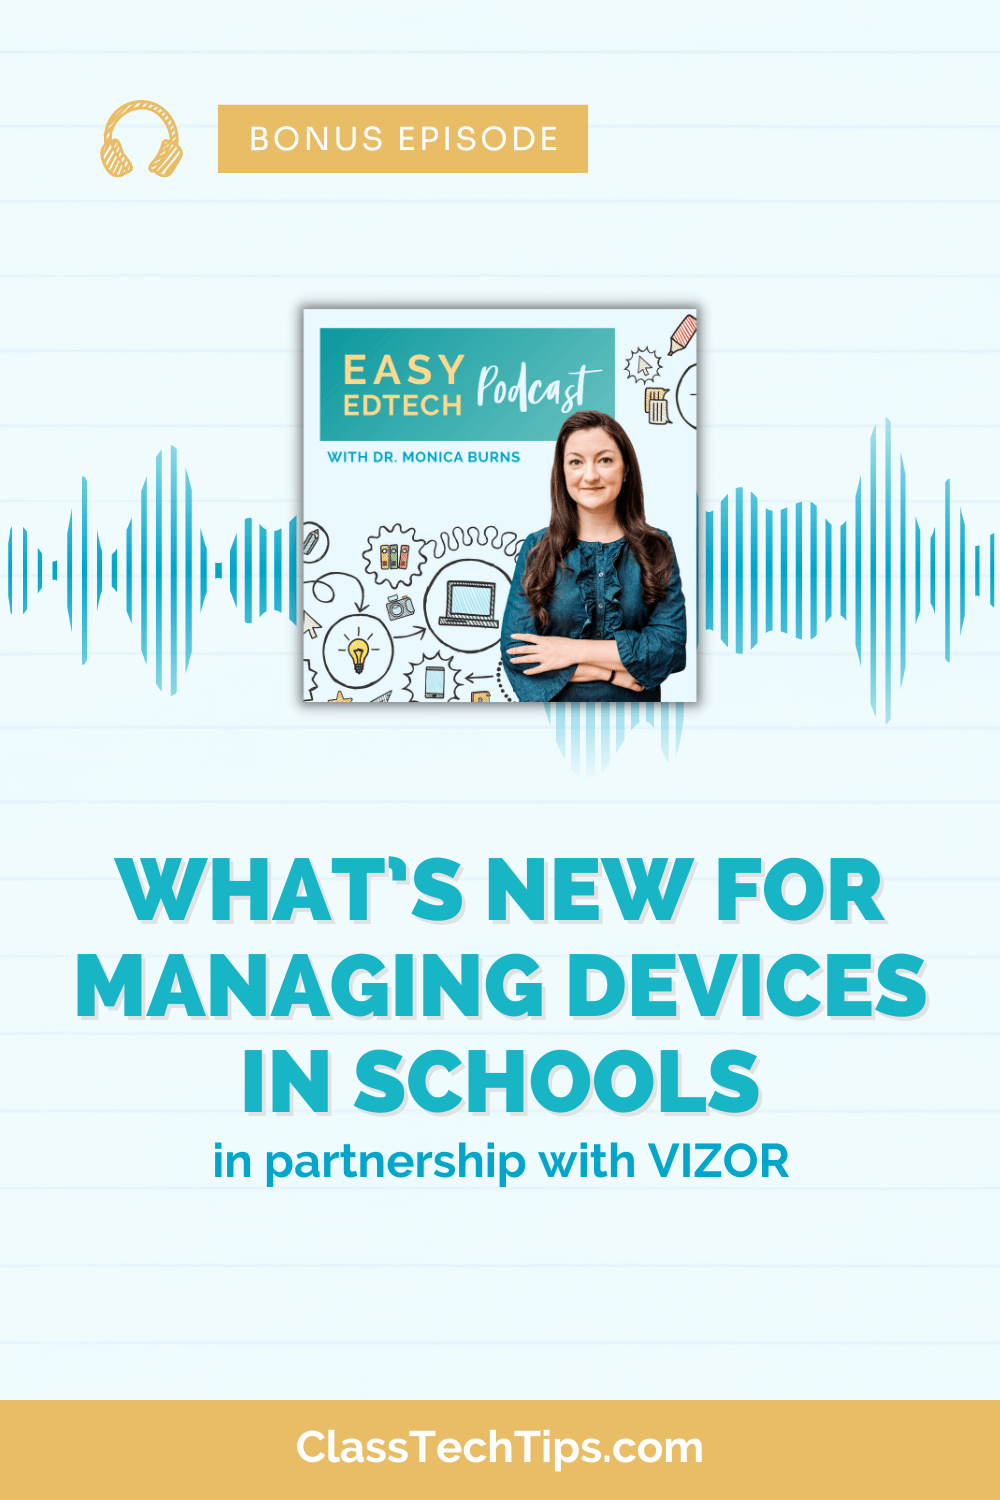 Featured image for the podcast episode, depicting the logo and hinting at the topic of effectively managing devices in schools with VIZOR.